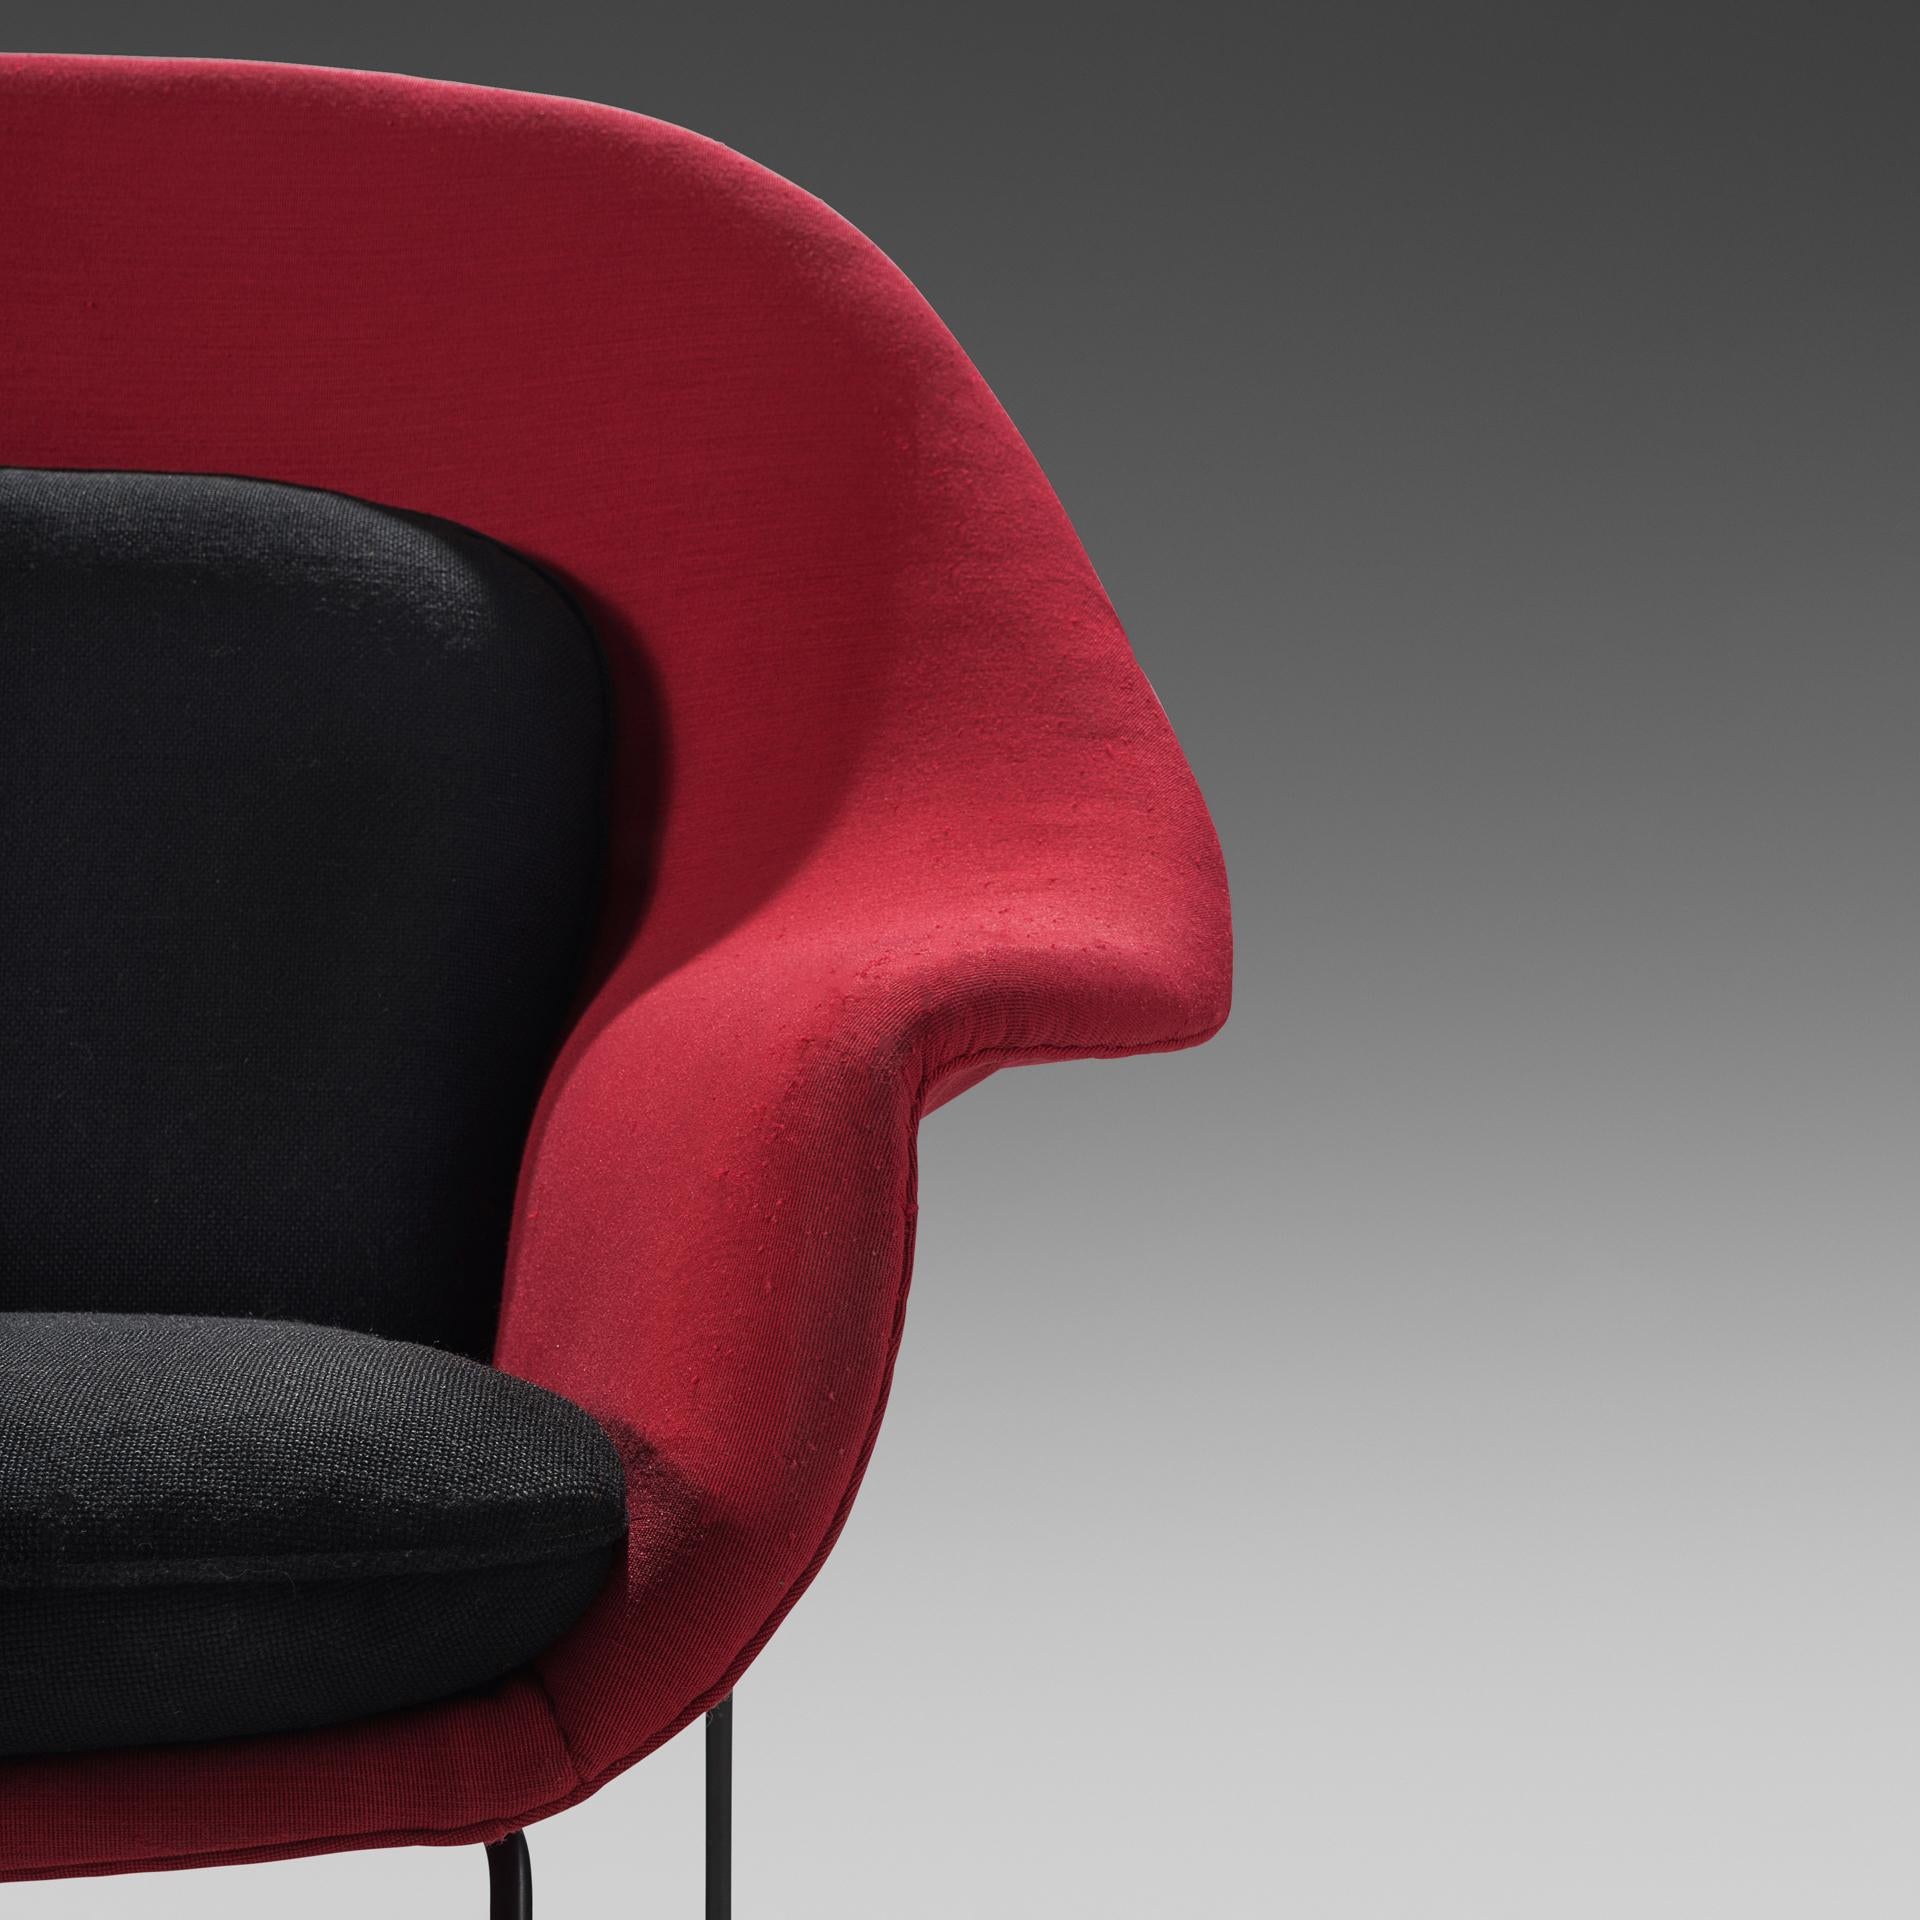 Mid-20th Century Eero Saarinen ‘Womb’ Lounge Chair in Red and Black Upholstery For Sale